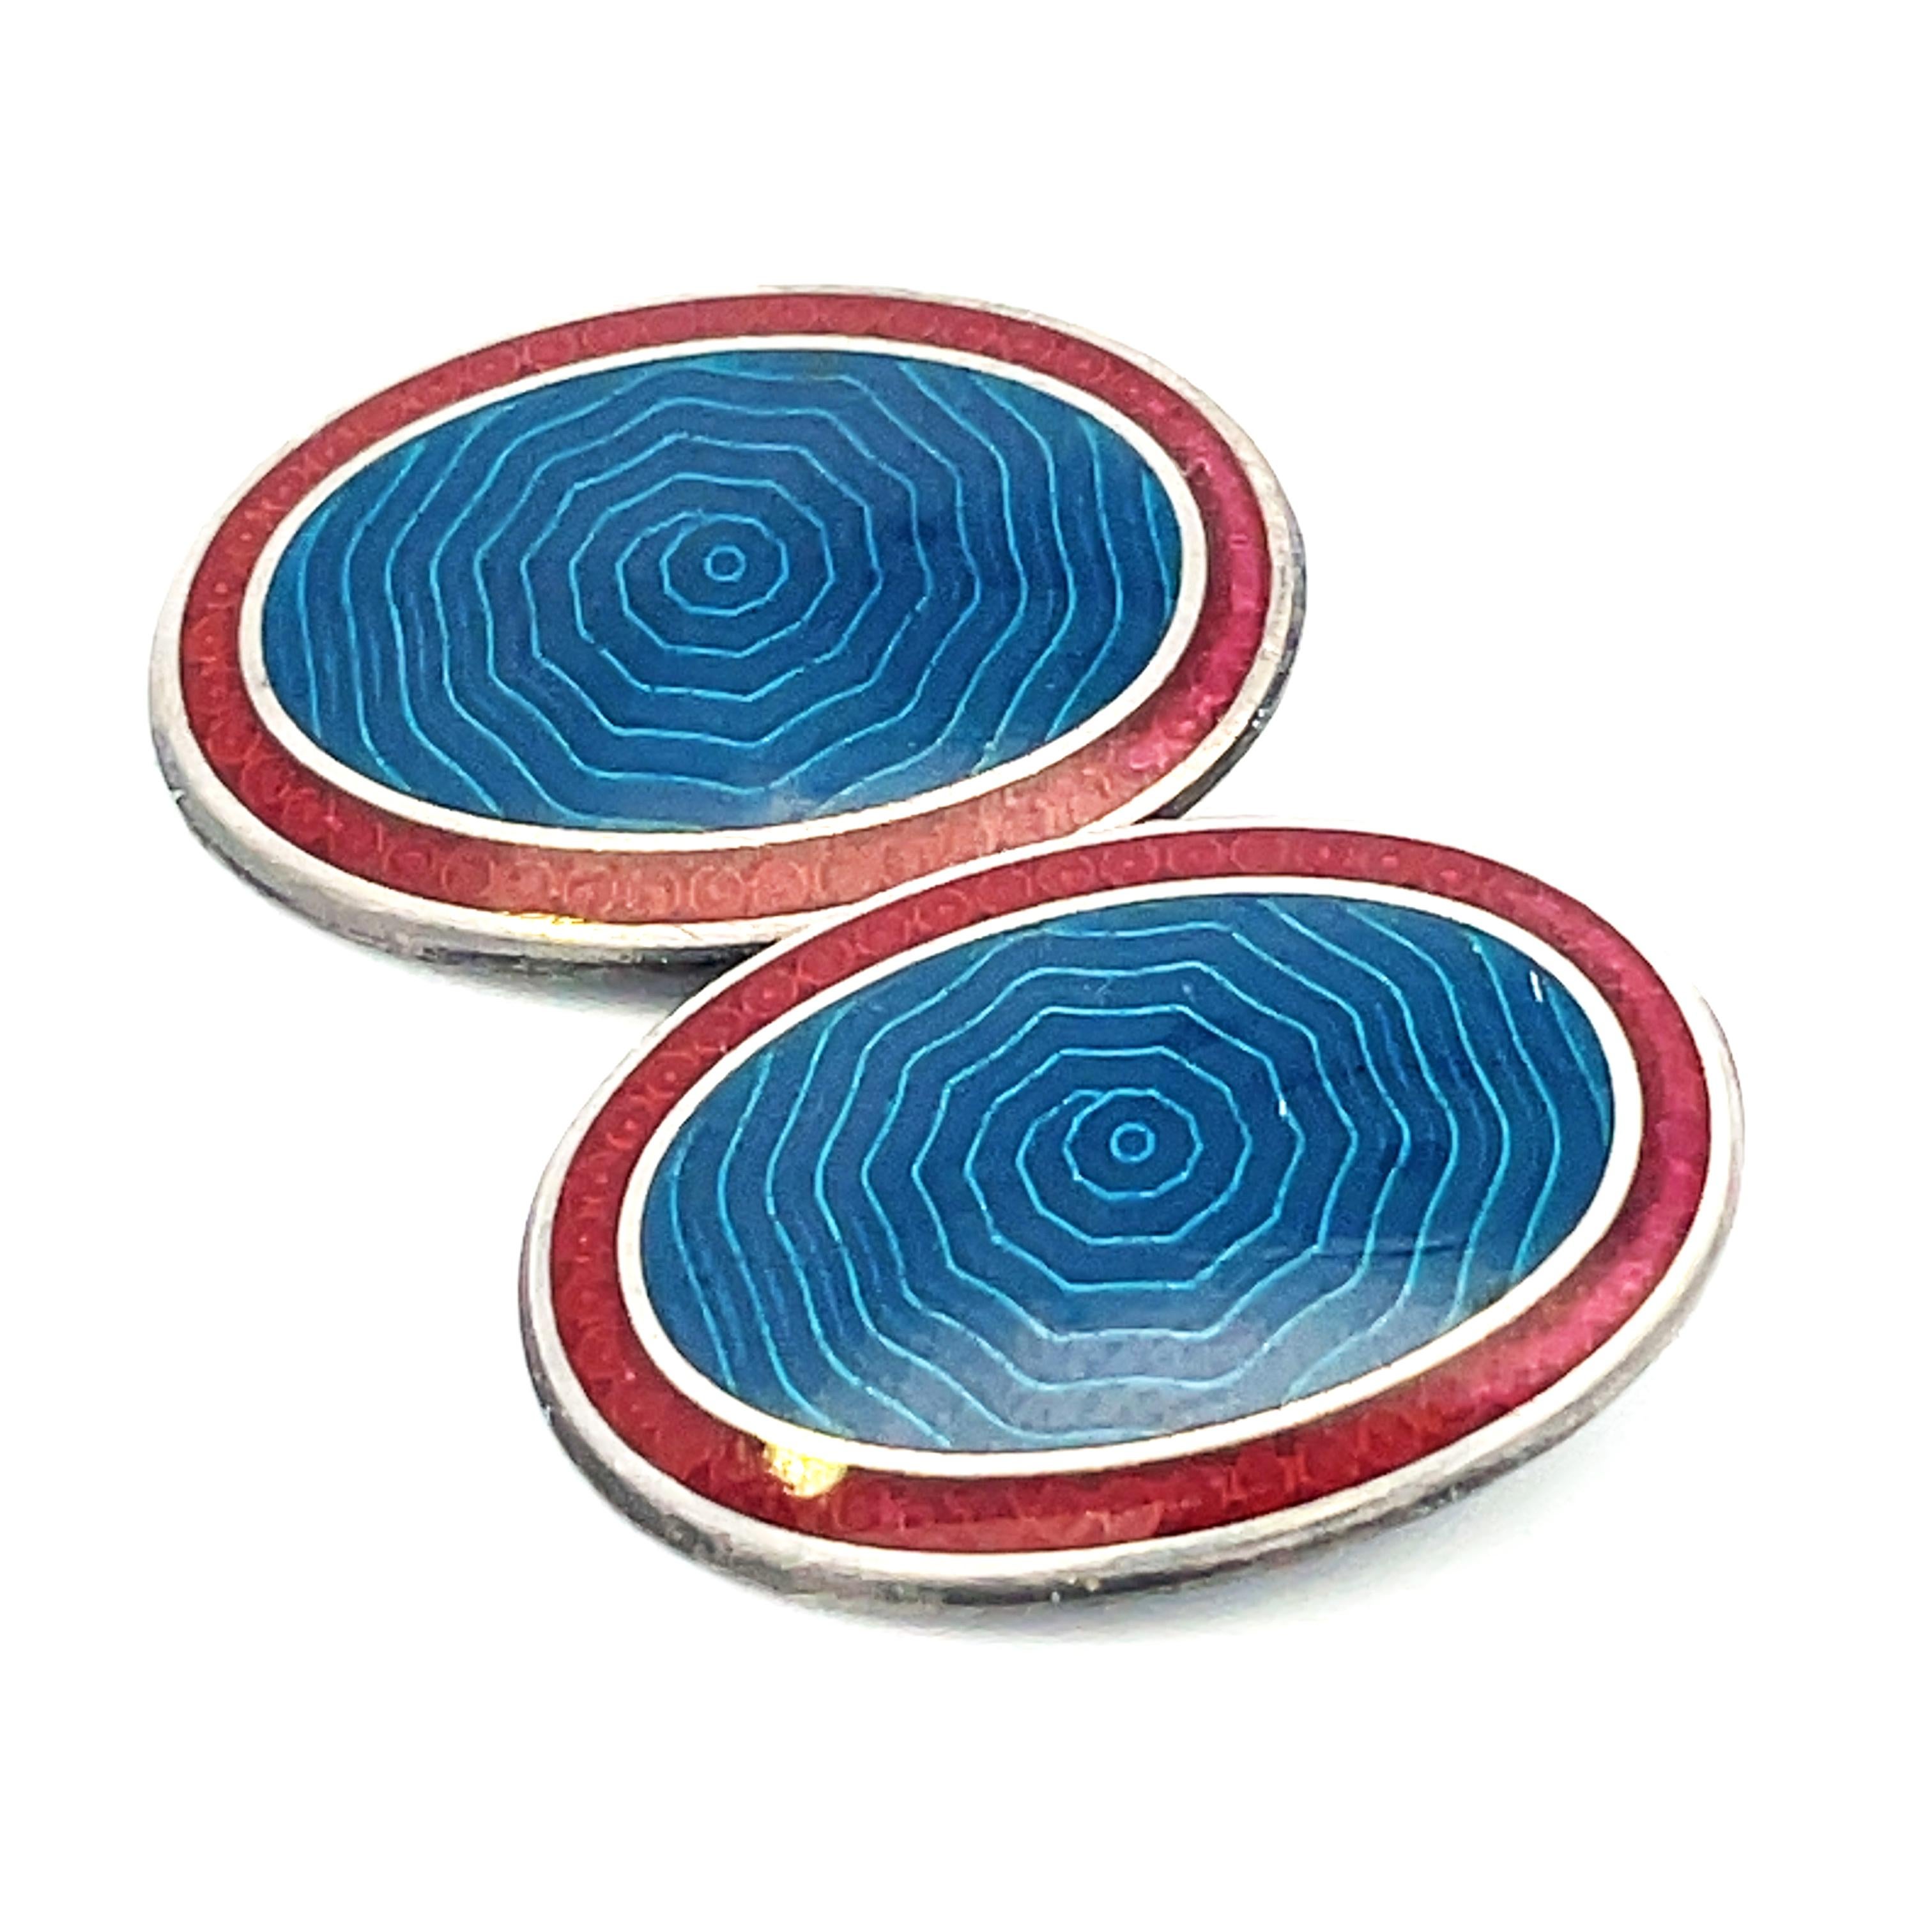 1925 Art Deco Blue and Red Enamel Sterling Silver Cufflinks For Sale 3